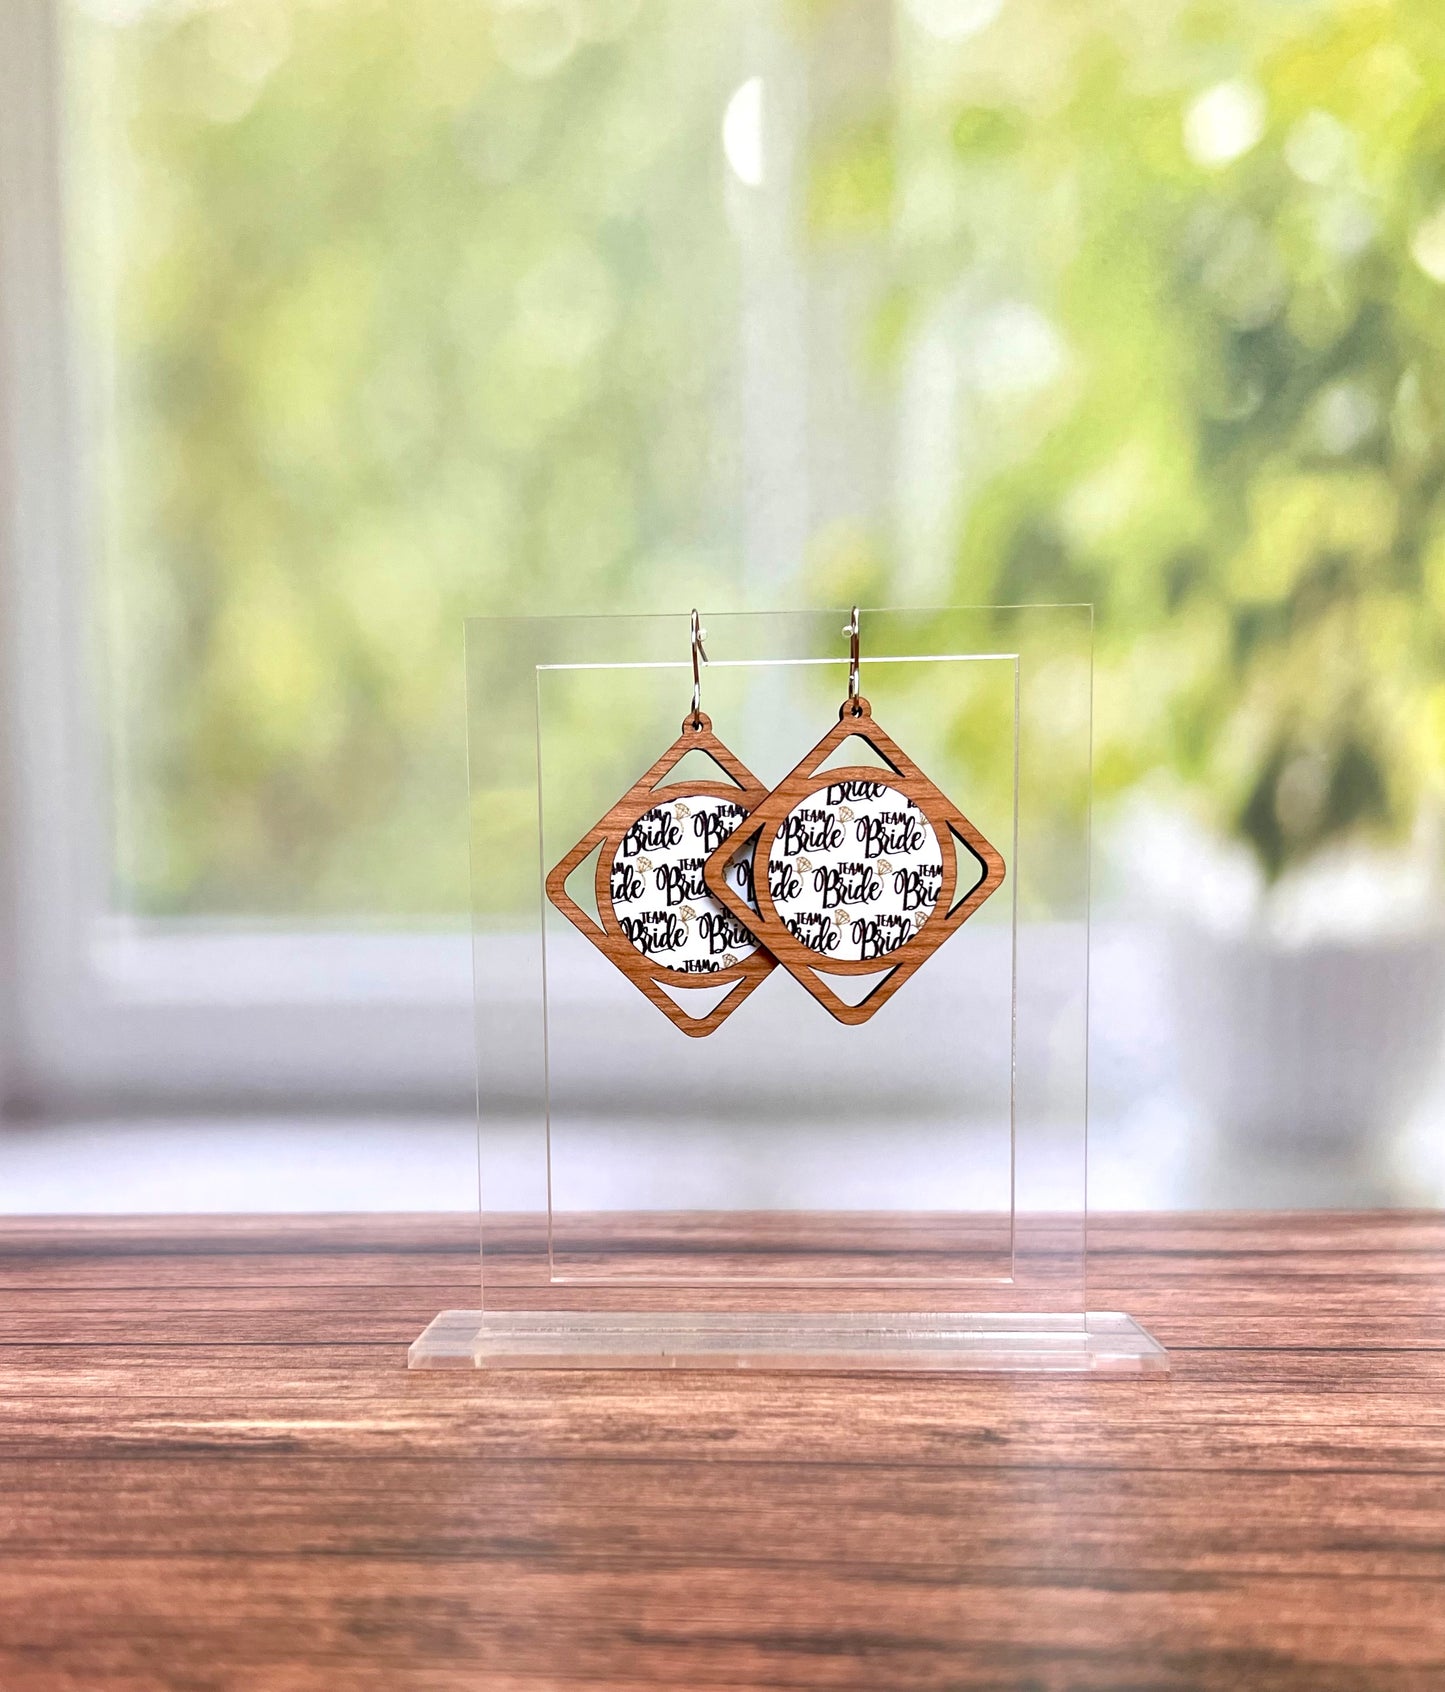 Square and Round Inlay Earrings